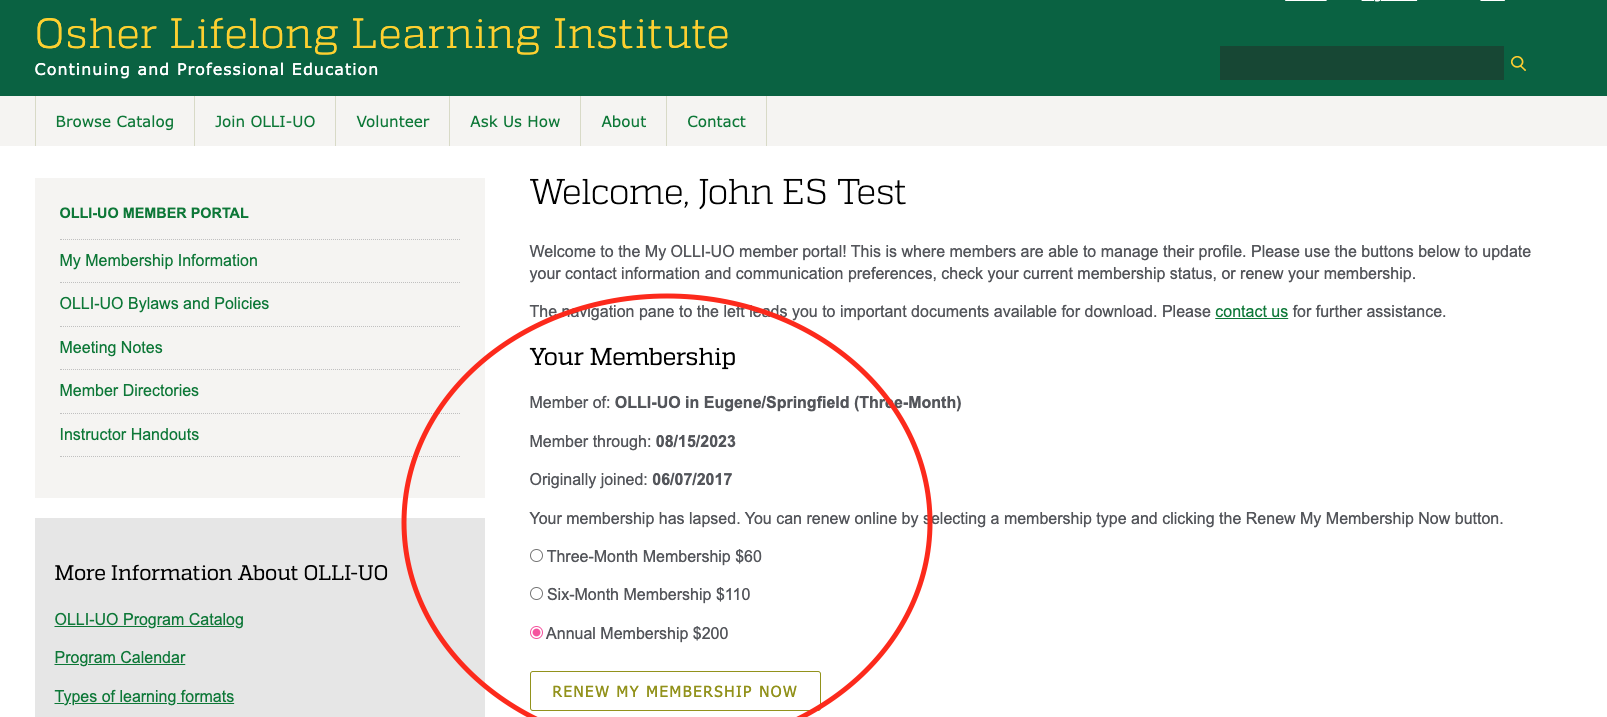 Screen shot of the OLLI-UO Member Portal welcome page with the Your Membership section circled in red indicating where you can renew your membership.